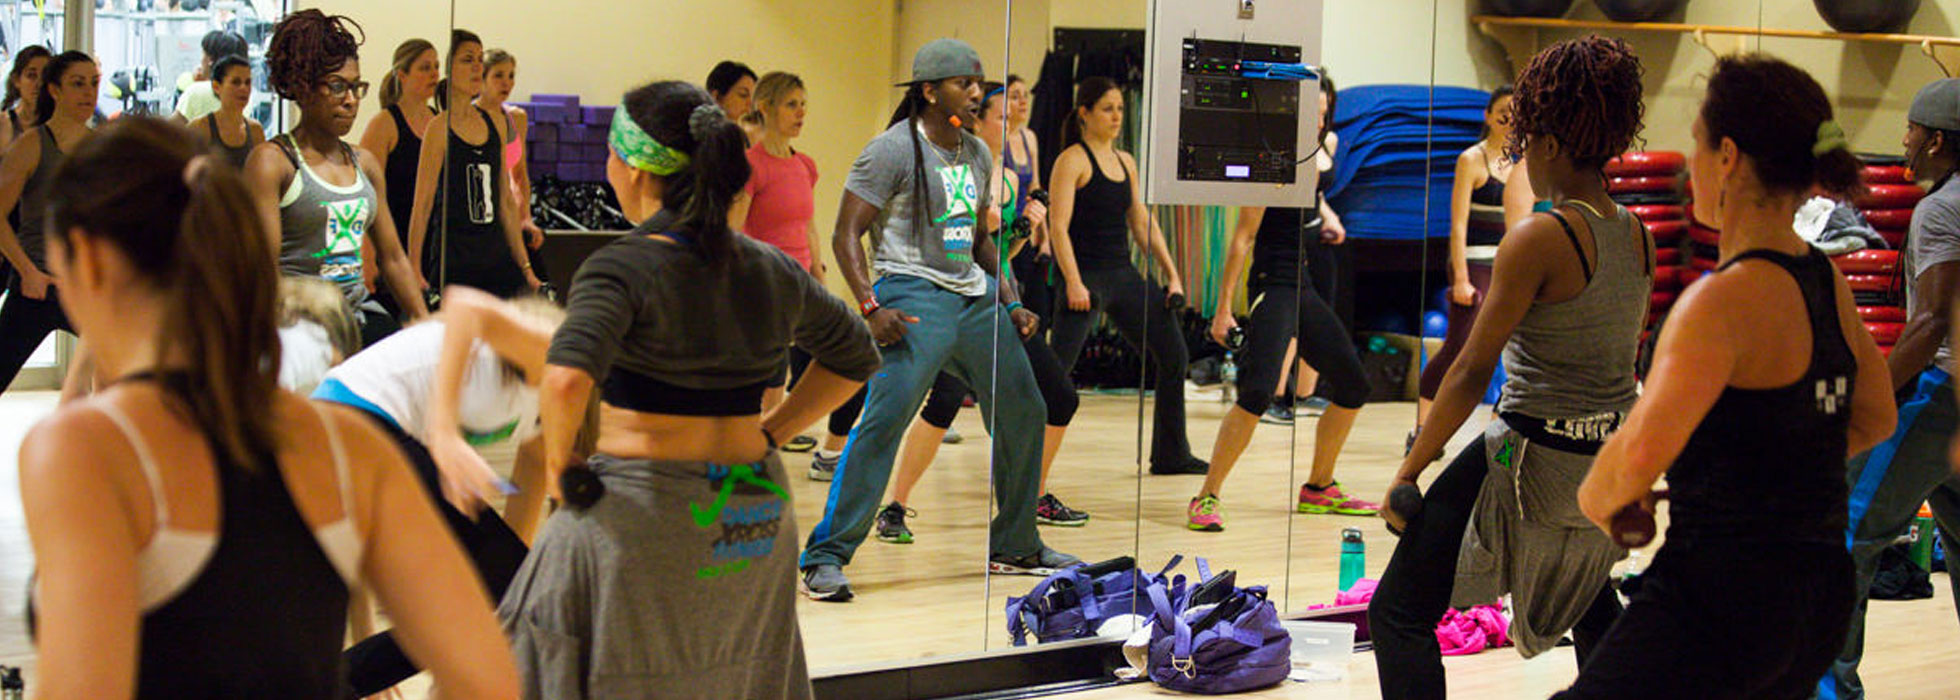 Why Dance Xross Fitness Is Ranked One of the Best Dance Fitness Studios In Kingston